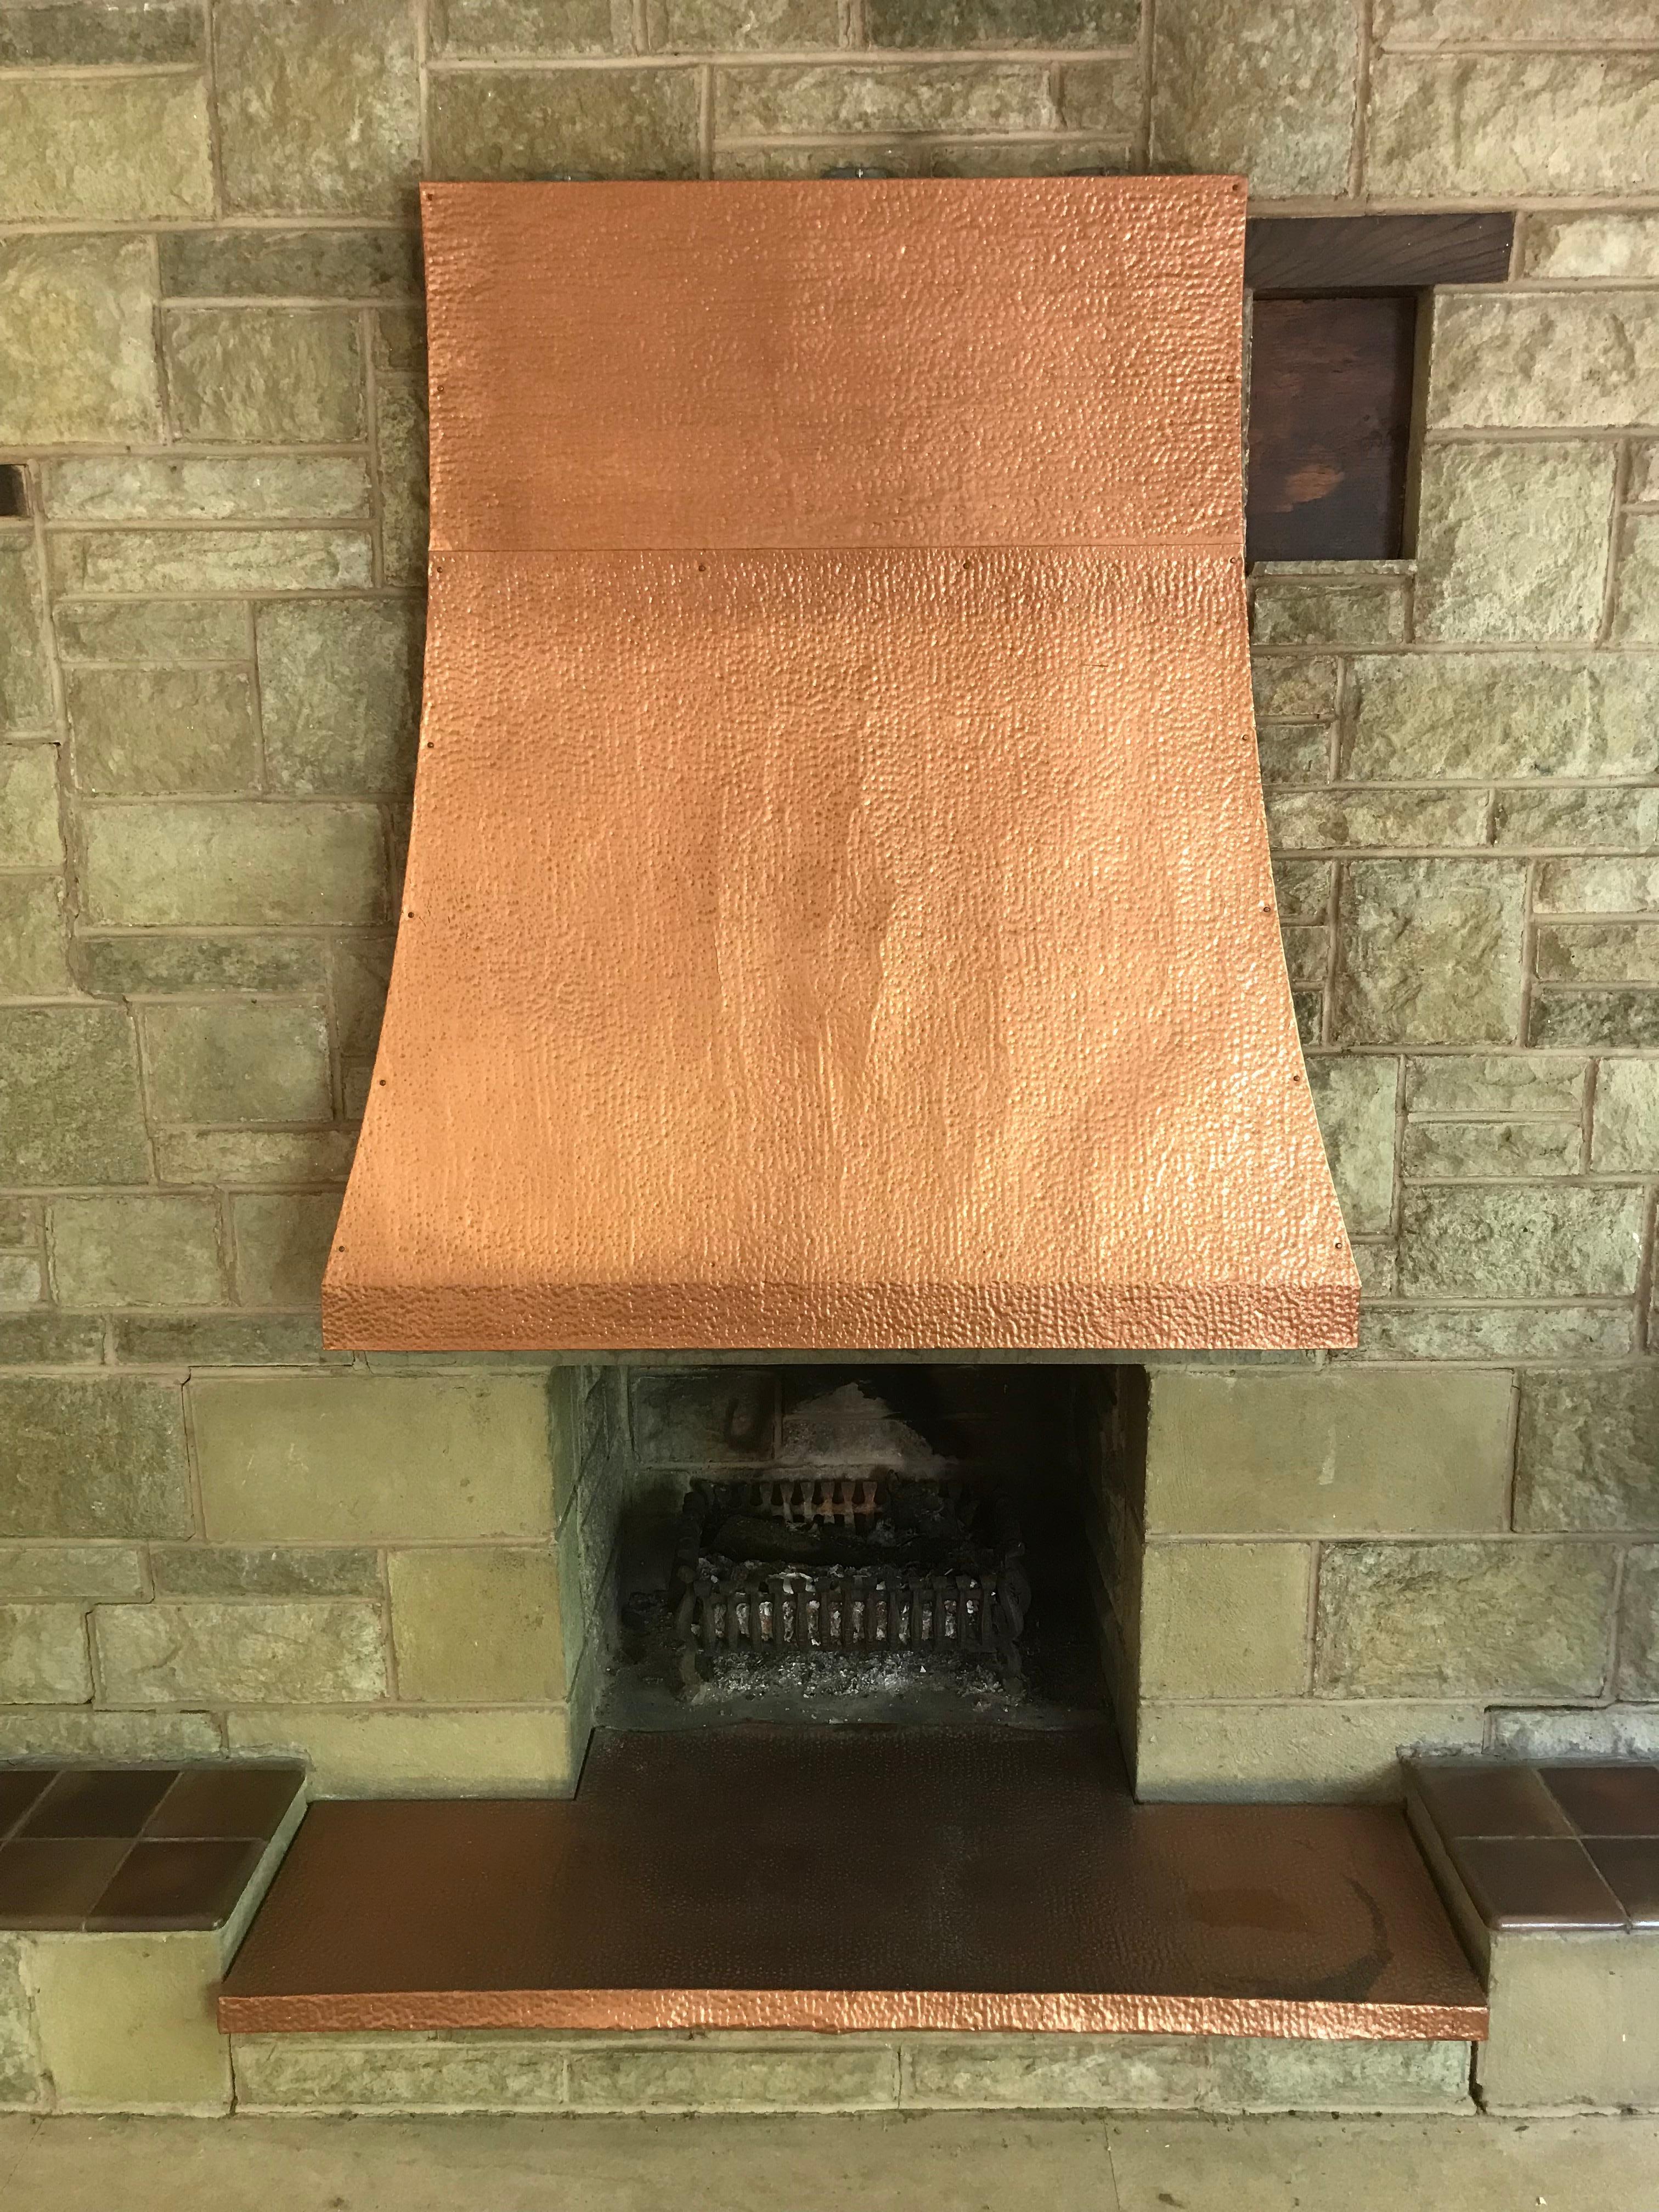 Totally original 1960 retro hammered copper on zinc fire place hood and base, 

measurements fire hood: H 128cm, width at base 117cm, width at top 89cm, depth at base 18cm, depth at top 4cm.

Base plate: width 141cm, max depth 55cm min depth